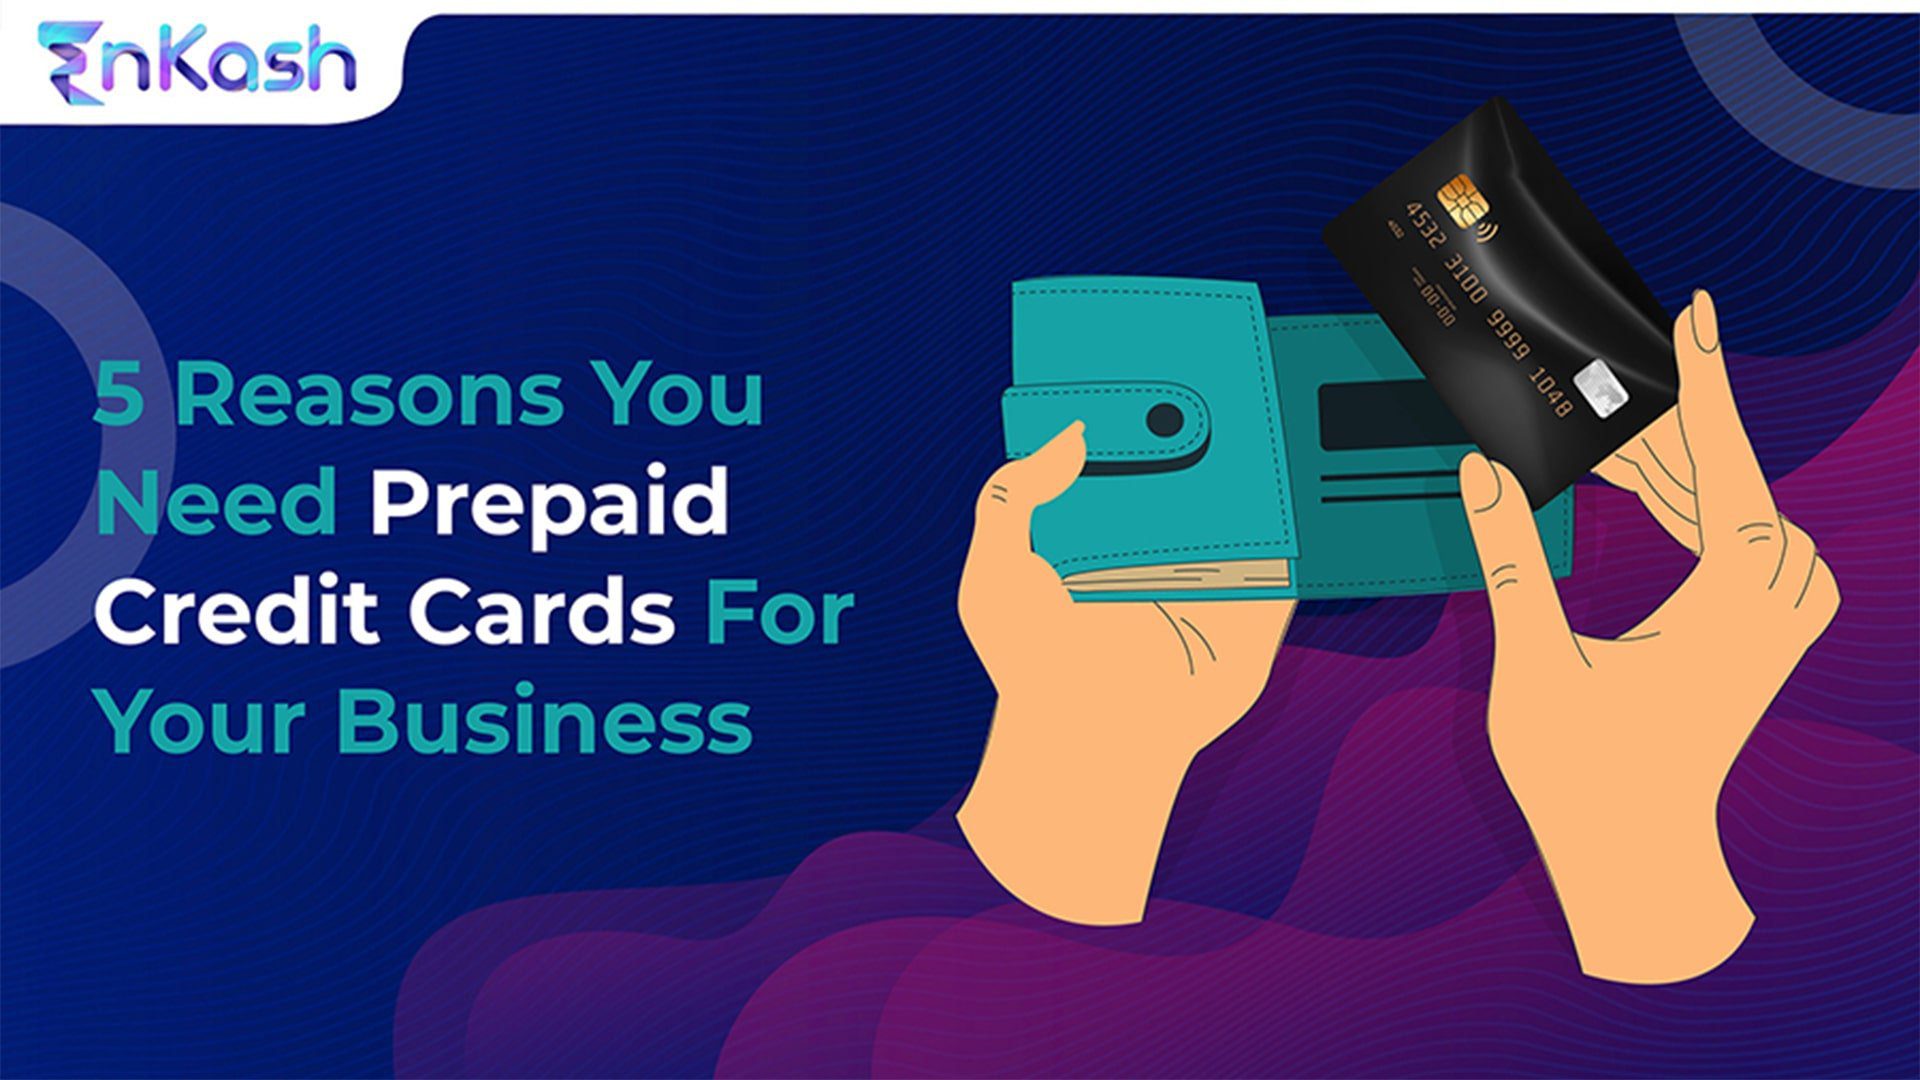 Reasons you need prepaid credit card for your business